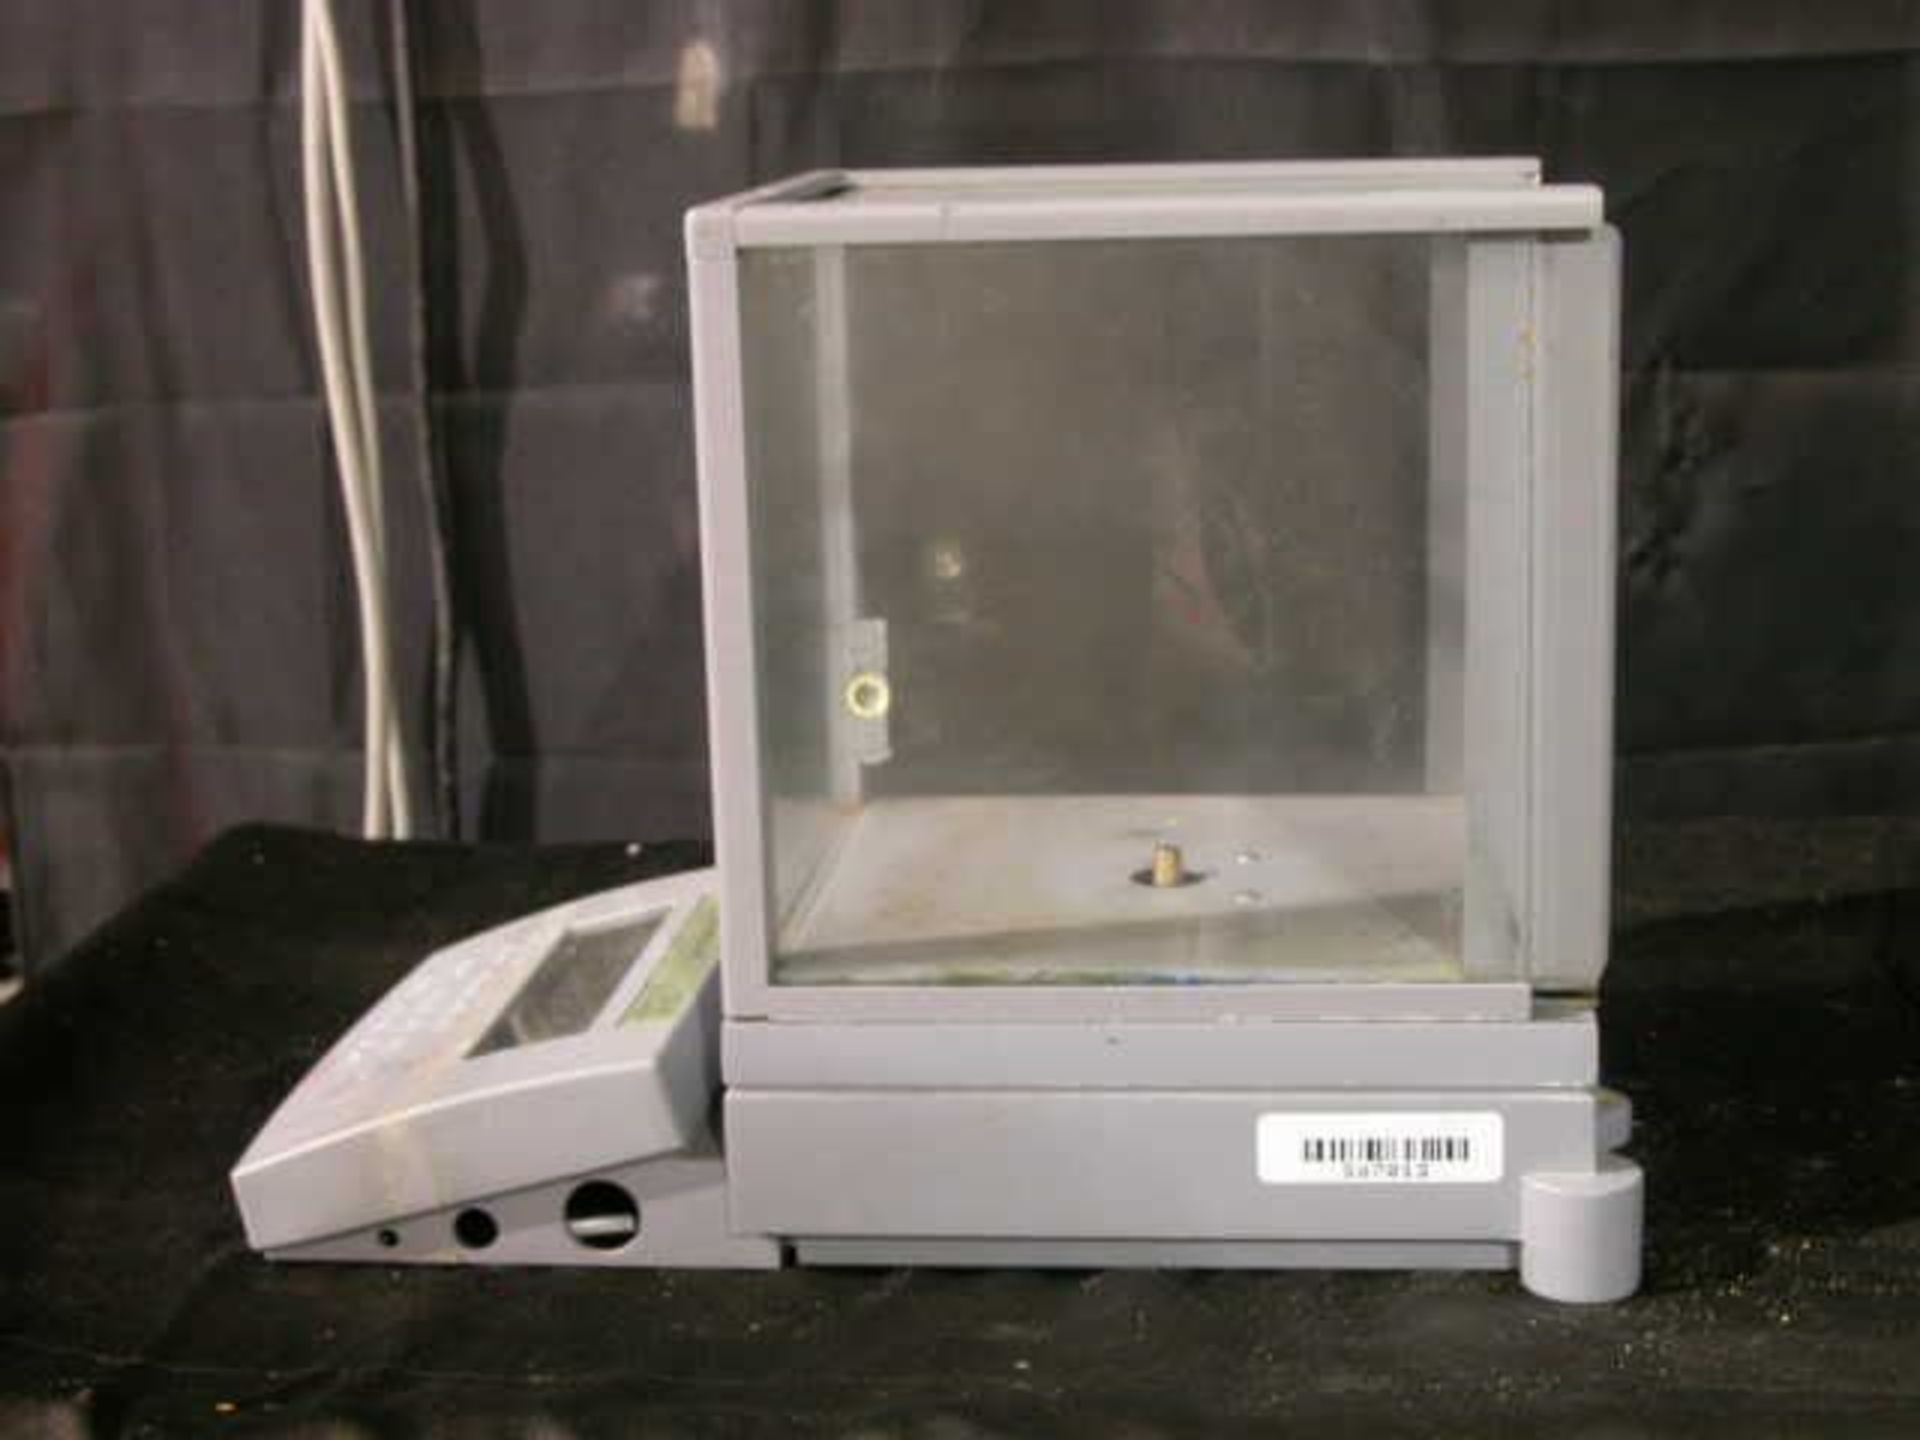 Denver Instruments DI-100 Digital Balance Scale (For Parts Not Working), Qty 1, 320836199790 - Image 3 of 5